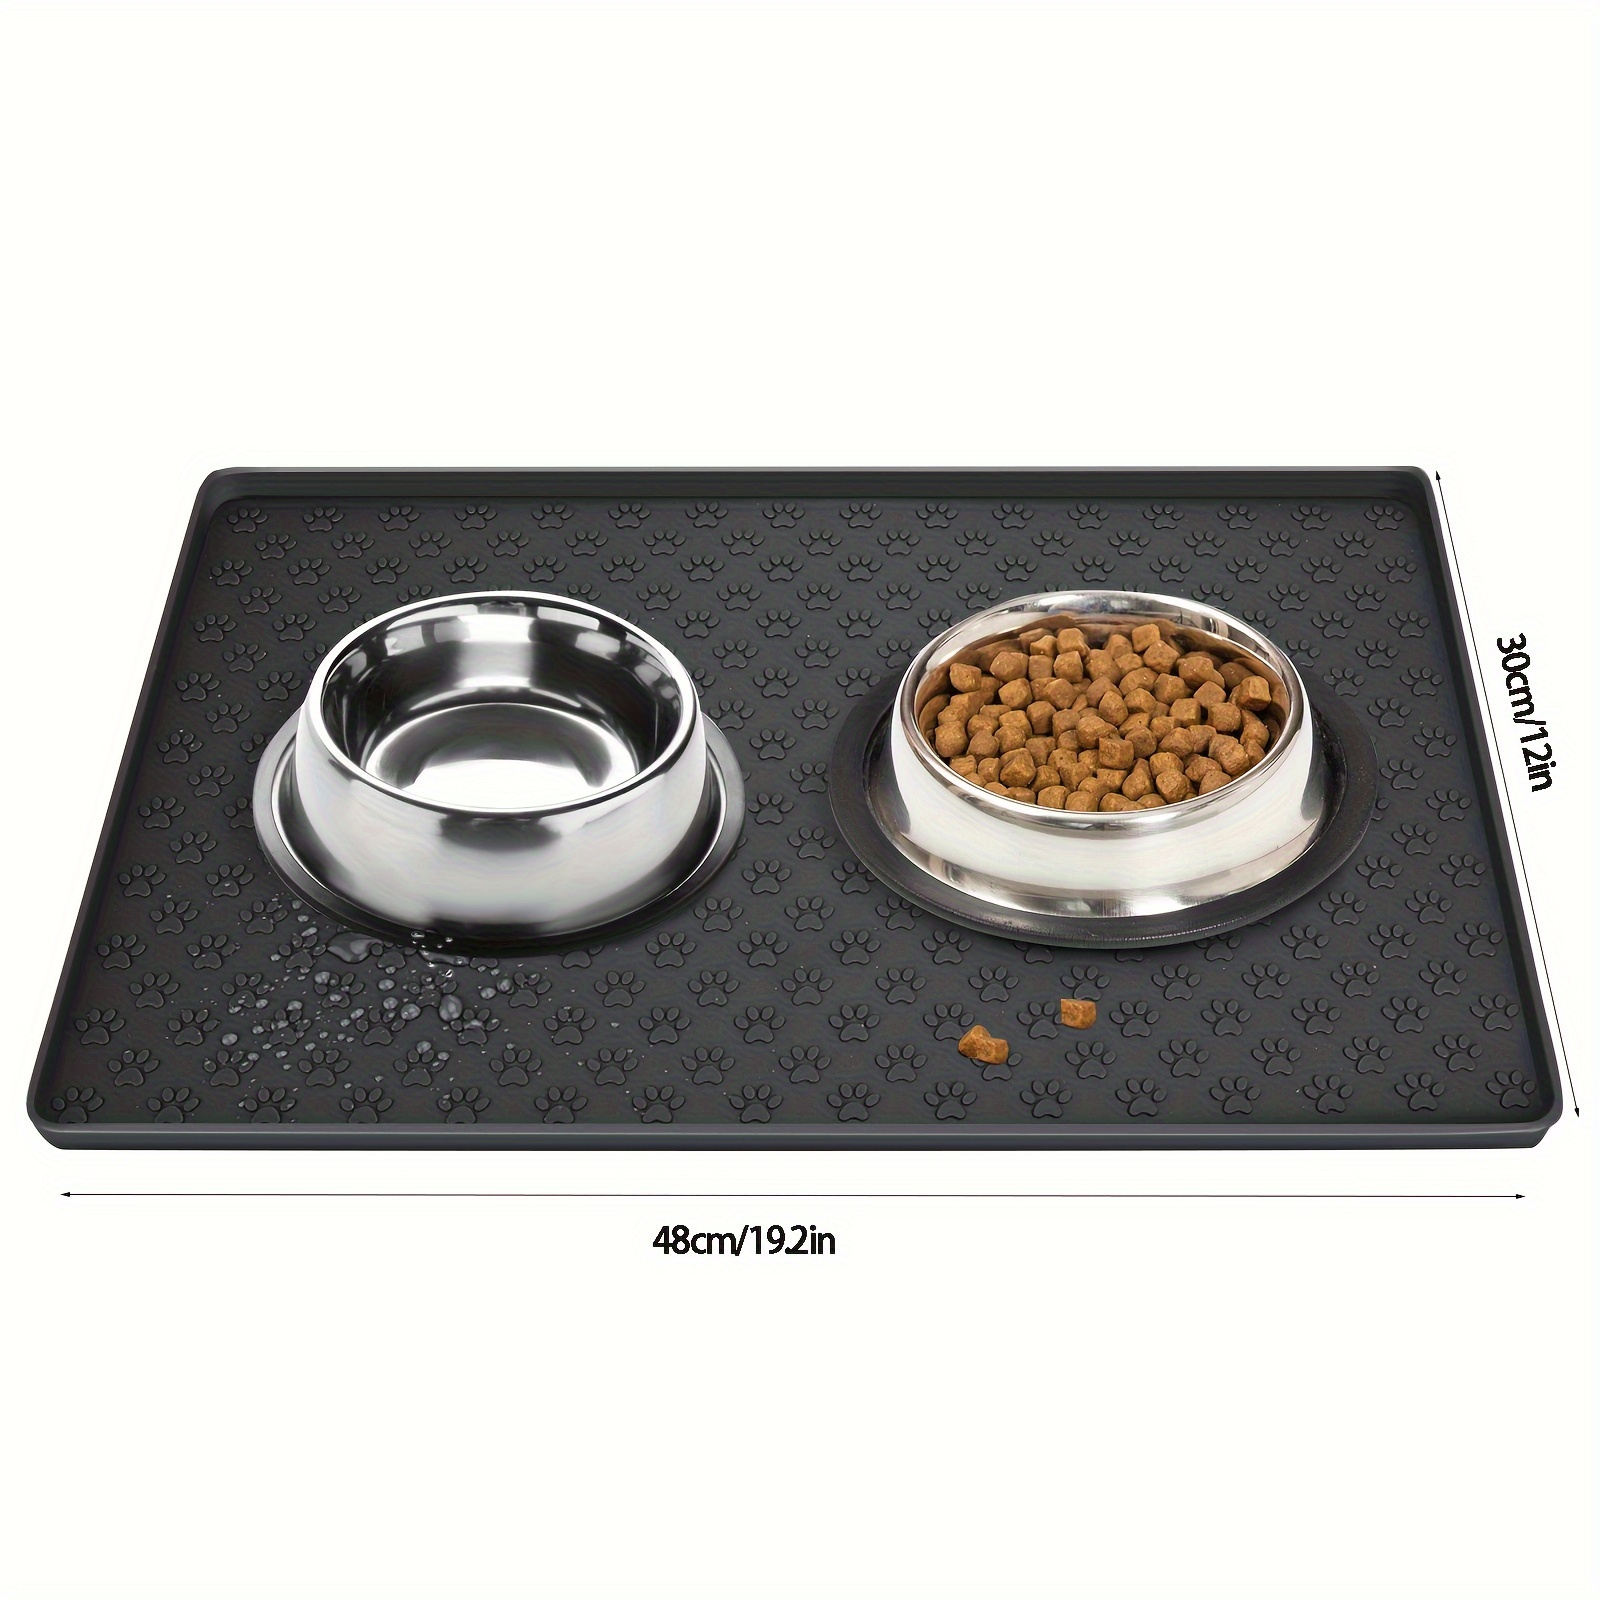 Dog Mat For Food And Water With Pocket Design, Foldable Waterproof